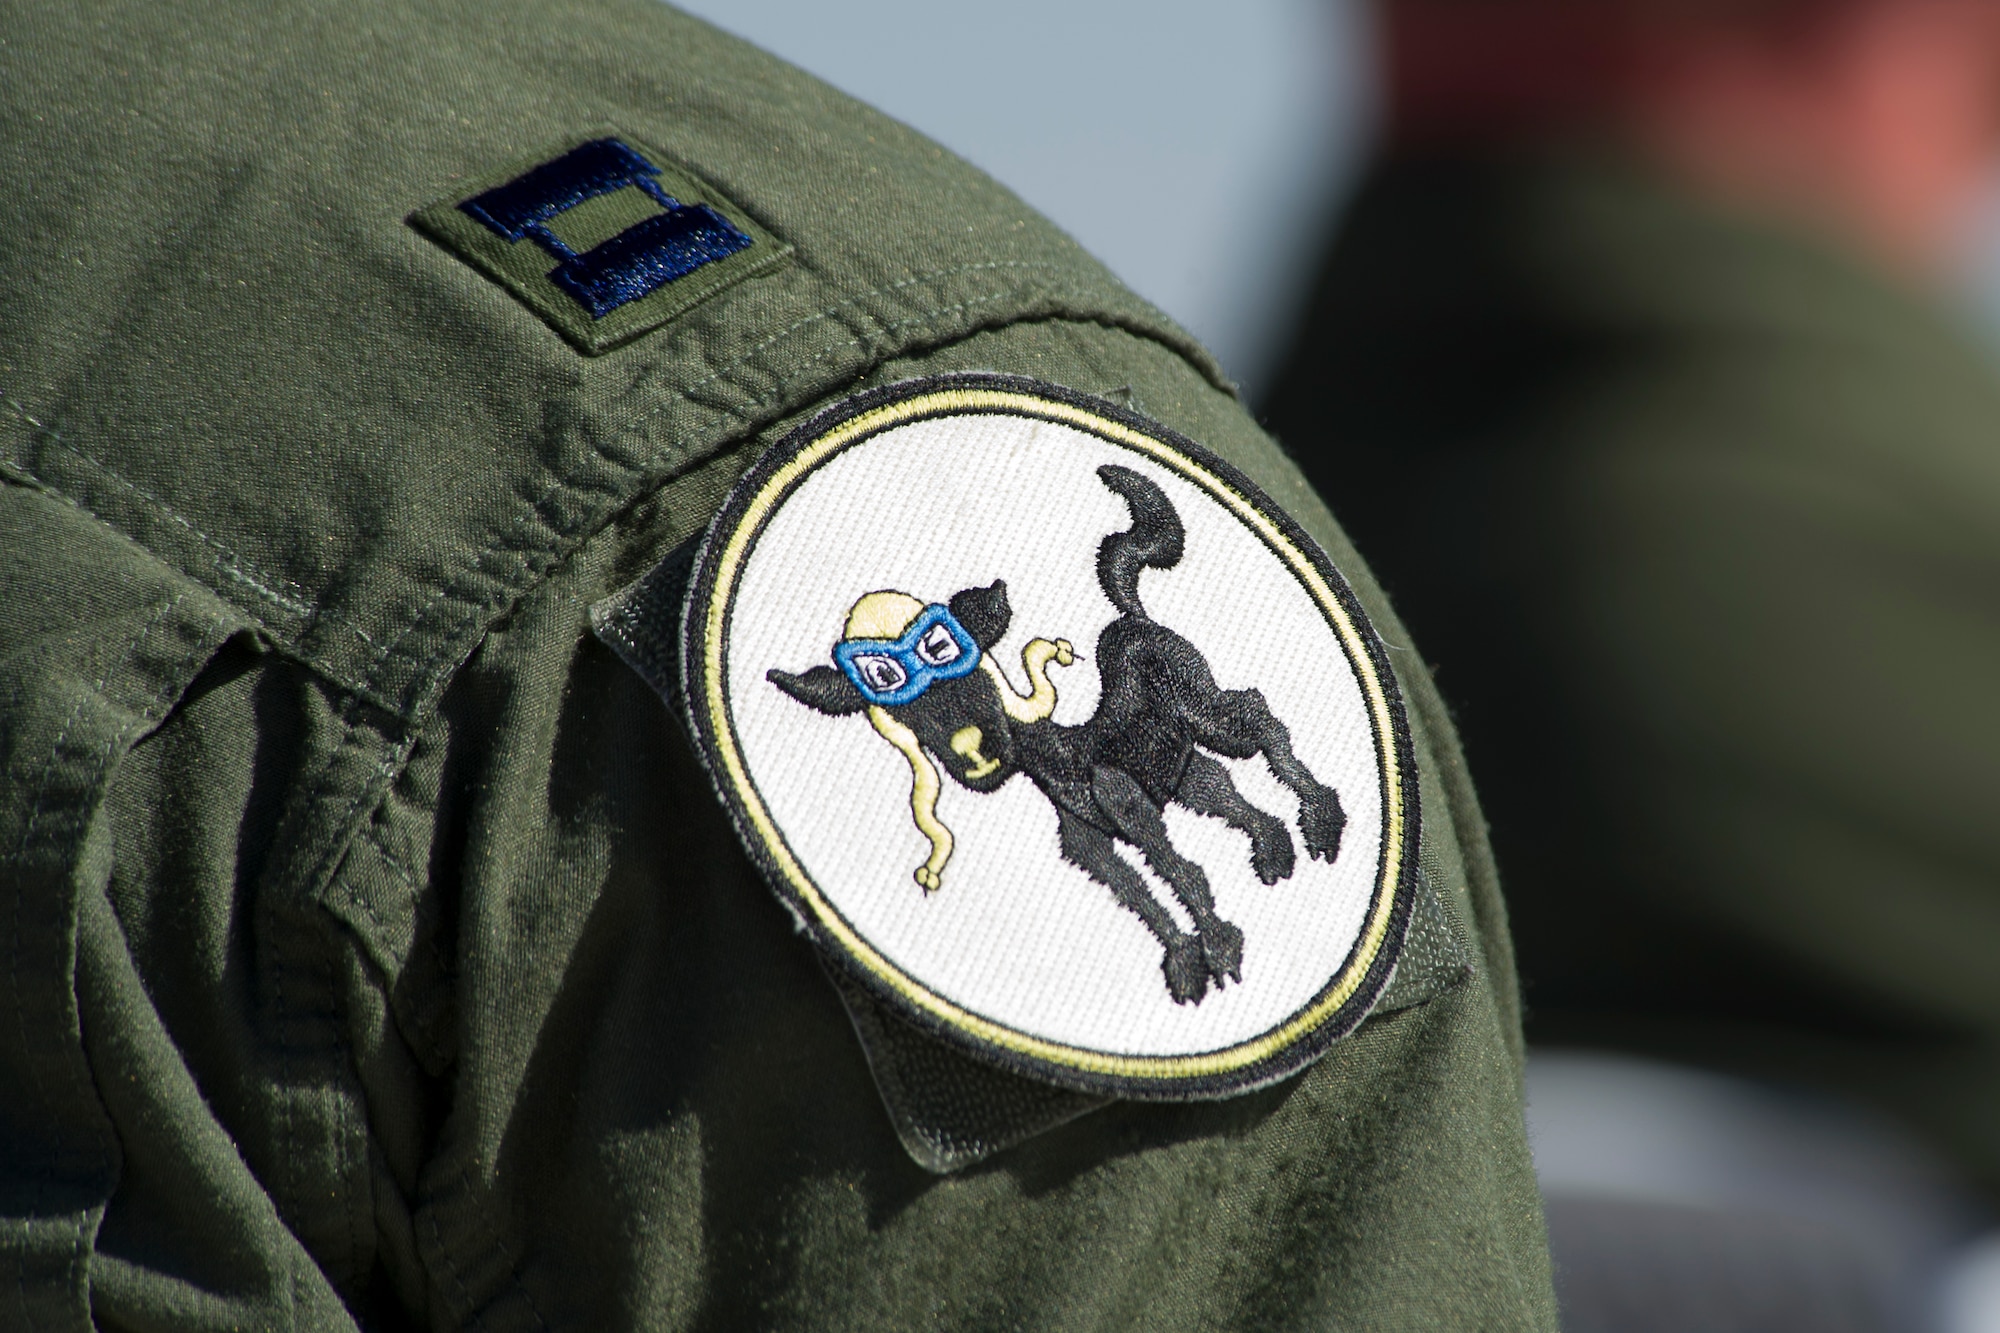 HOLLOMAN AIR FORCE BASE, N.M – A member of the 8th Fighter Squadron wears the historic “Black Sheep” patch, May 13, 2011, during the 8th Fighter Squadron  inactivation ceremony. The 8th FS, known as the “Black Sheep,” was first activated in January 1941 and its mission and aircraft have transitioned several times to support the emerging needs of the Air Force. Starting with the P-40 Warhawk, the “Black Sheep” have led the way in fielding, flying and employing the Air Force’s newest air superiority aircraft. Currently flying the F-22 Raptor, the unit’s inactivation means that its Airman and aircraft will be relocated to other units on Holloman. The famed “Black Sheep”” patch, name, and colors will be maintained by Air Force historians for reactivation when needed. (U.S. Air Force photo by Tech Sgt. Joe Laws / Released)